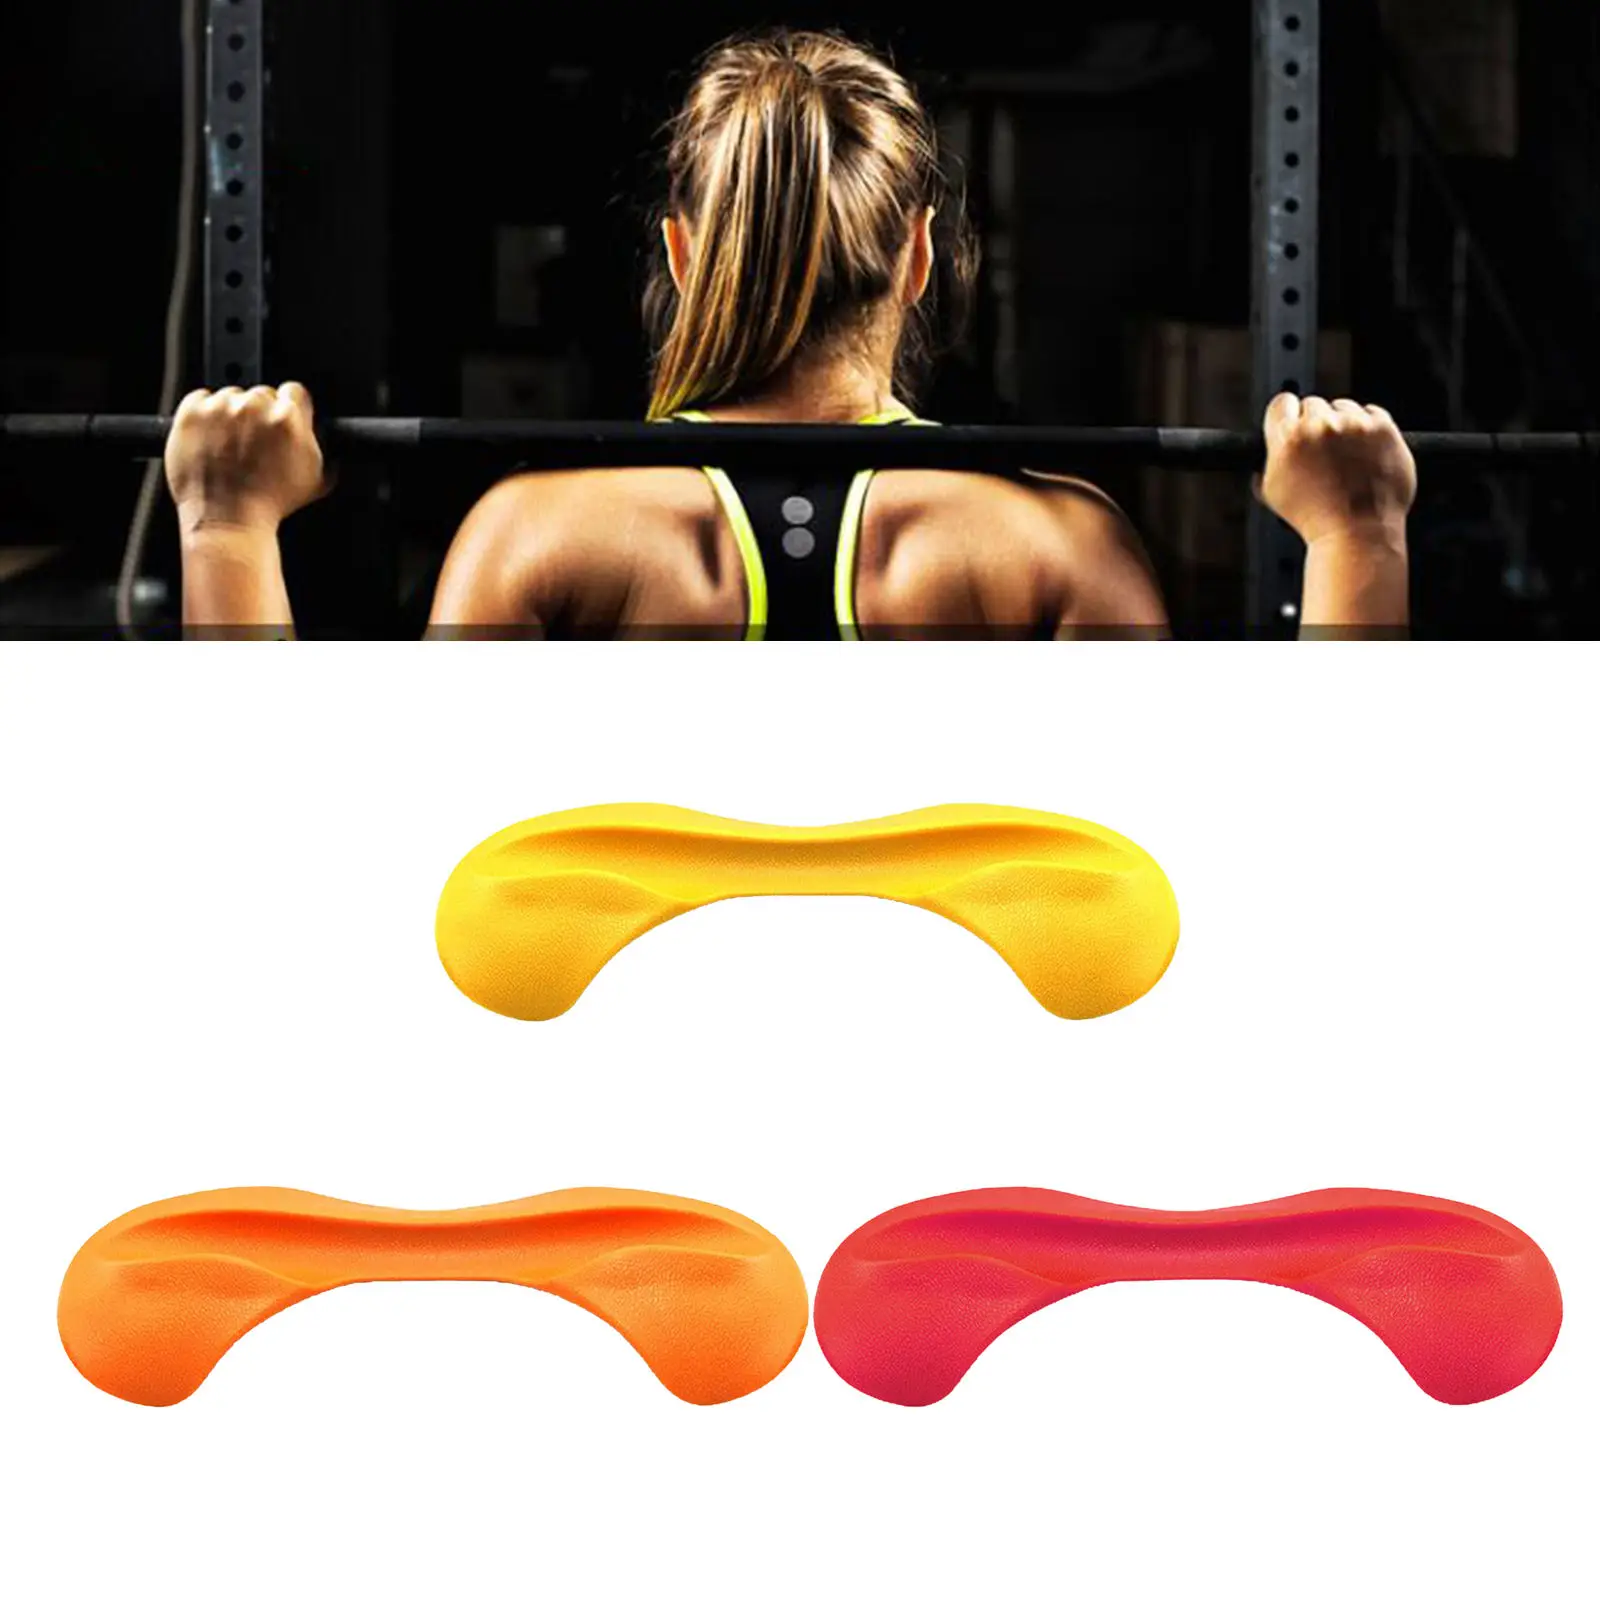 Barbell Bar Special Protection Neck Pad Stabilizing Bar for Weight Lifting, Fitness Sports Safety Attachment Fitness